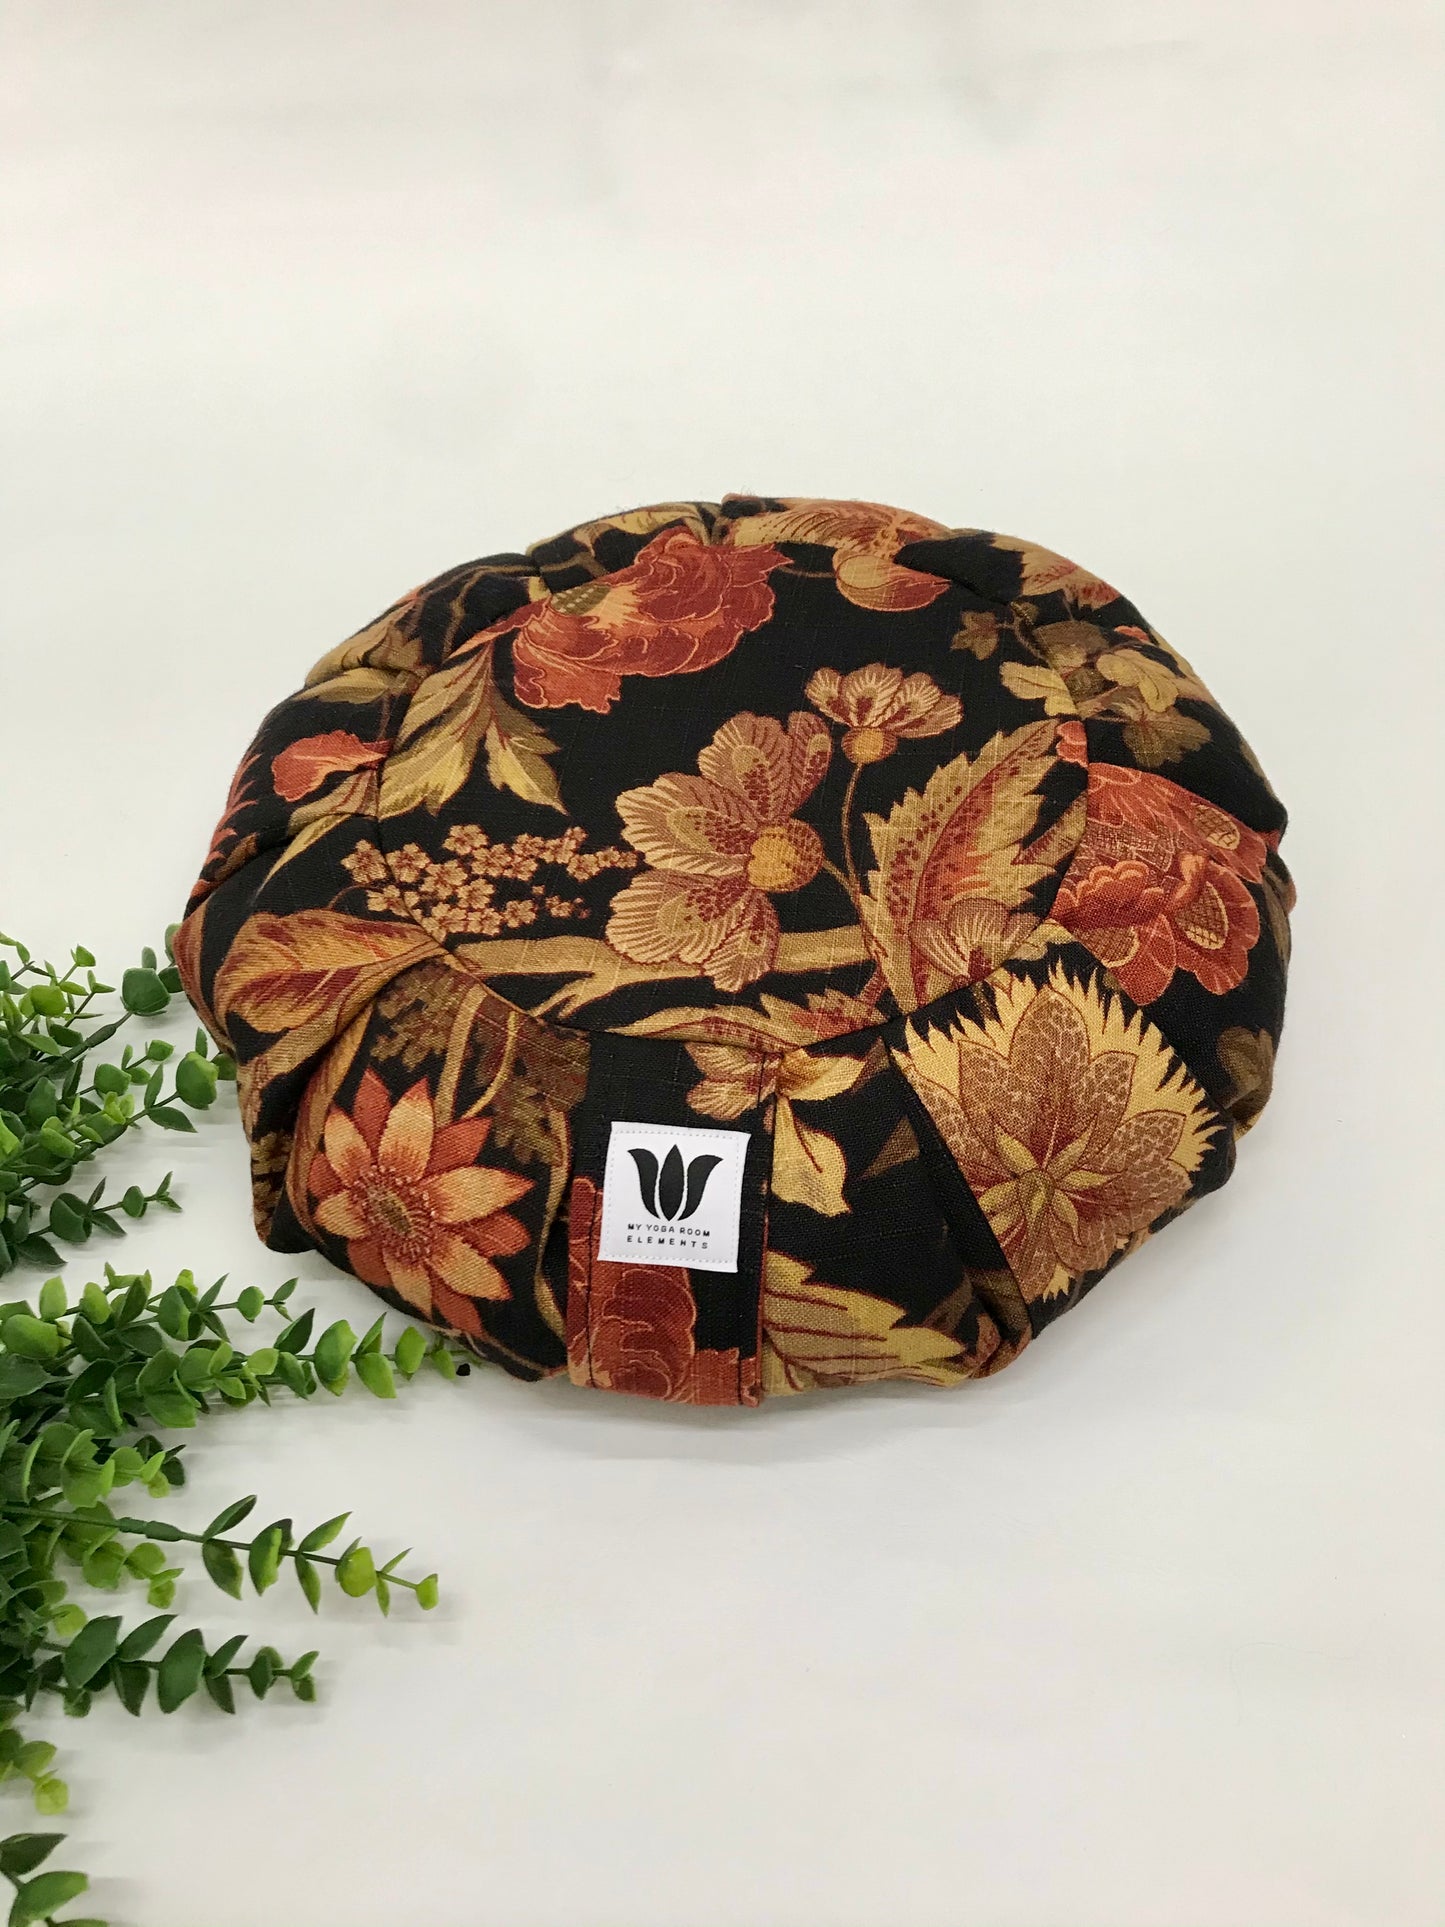 Handcrafted premium linen fabric meditation seat cushion in rich autumn colour floral print fabric.. Align the spine and body in comfort to calm the monkey mind in your meditation practice. Handcrafted in Calgary, Alberta Canada